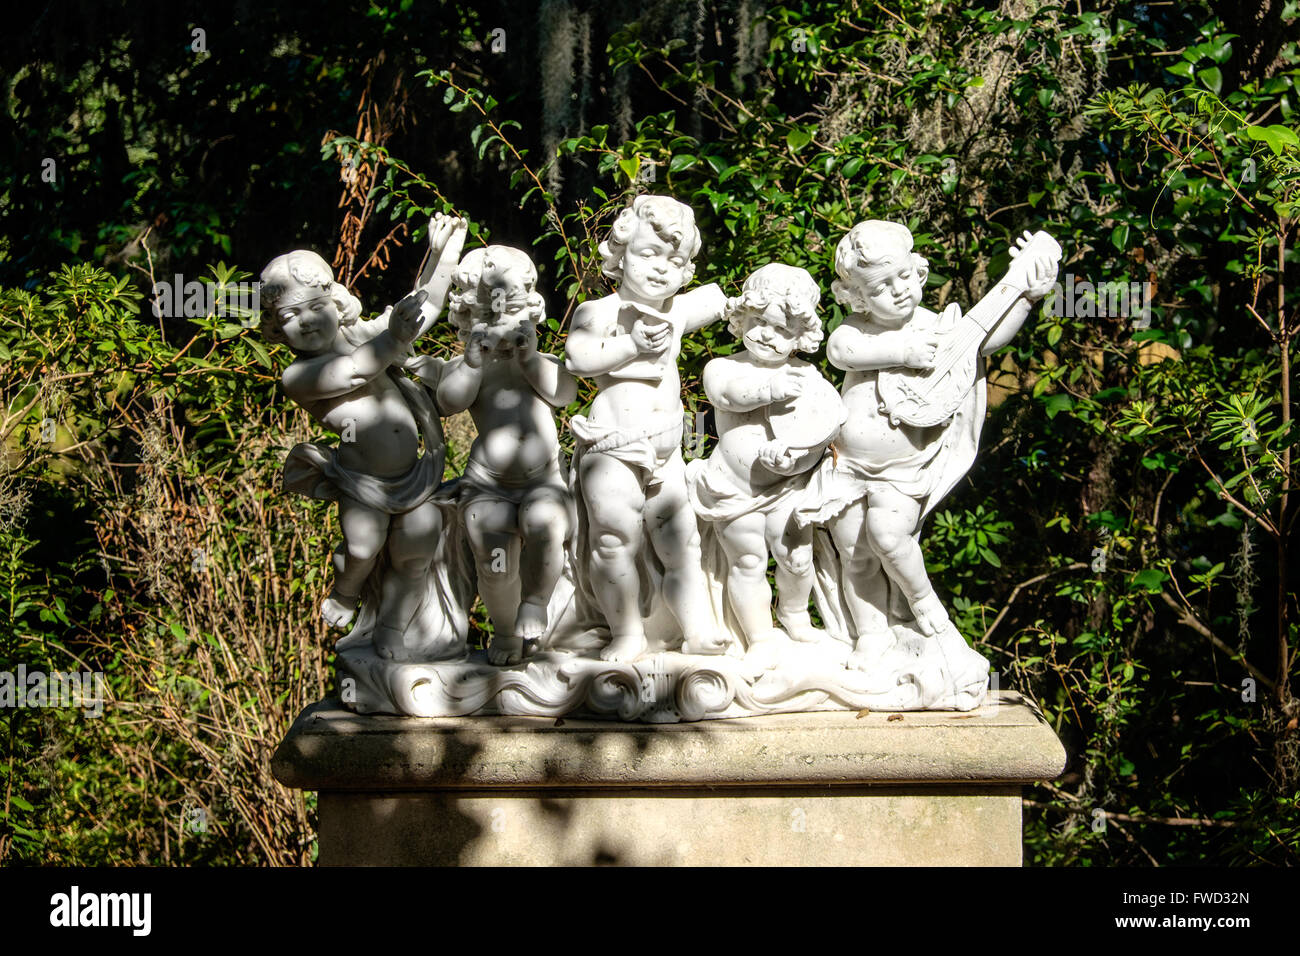 Statue of angles playing music in secret gardens at Middleton Place, Charleston, South Carolina, USA Stock Photo